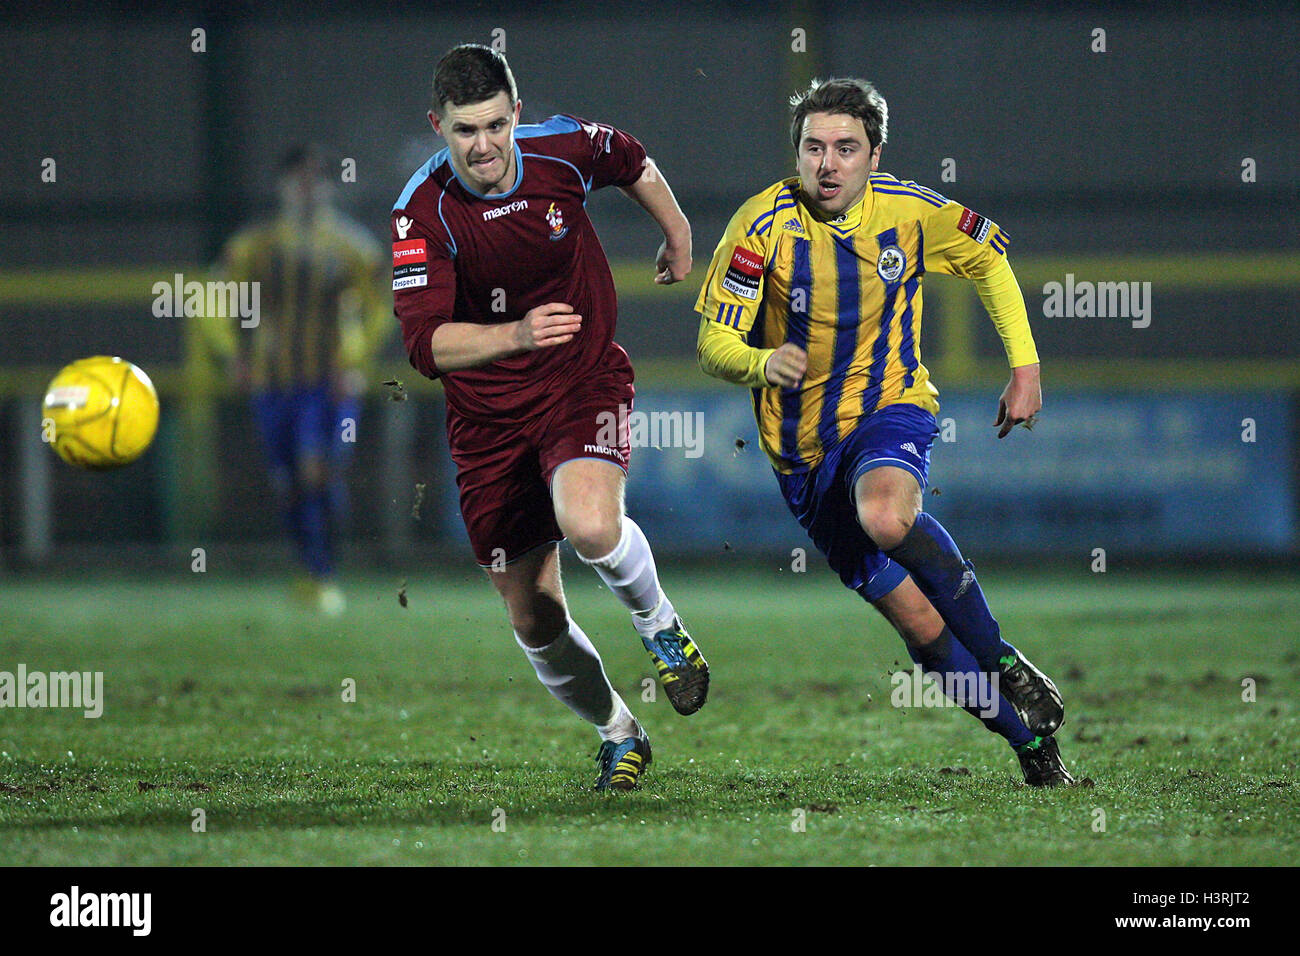 Kurt Smith of Romford evades Sam West of Brentwood - Romford vs Brentwood Town - Ryman League Division One North Football at Ship Lane, Thurrock FC - 09/01/13 Stock Photo